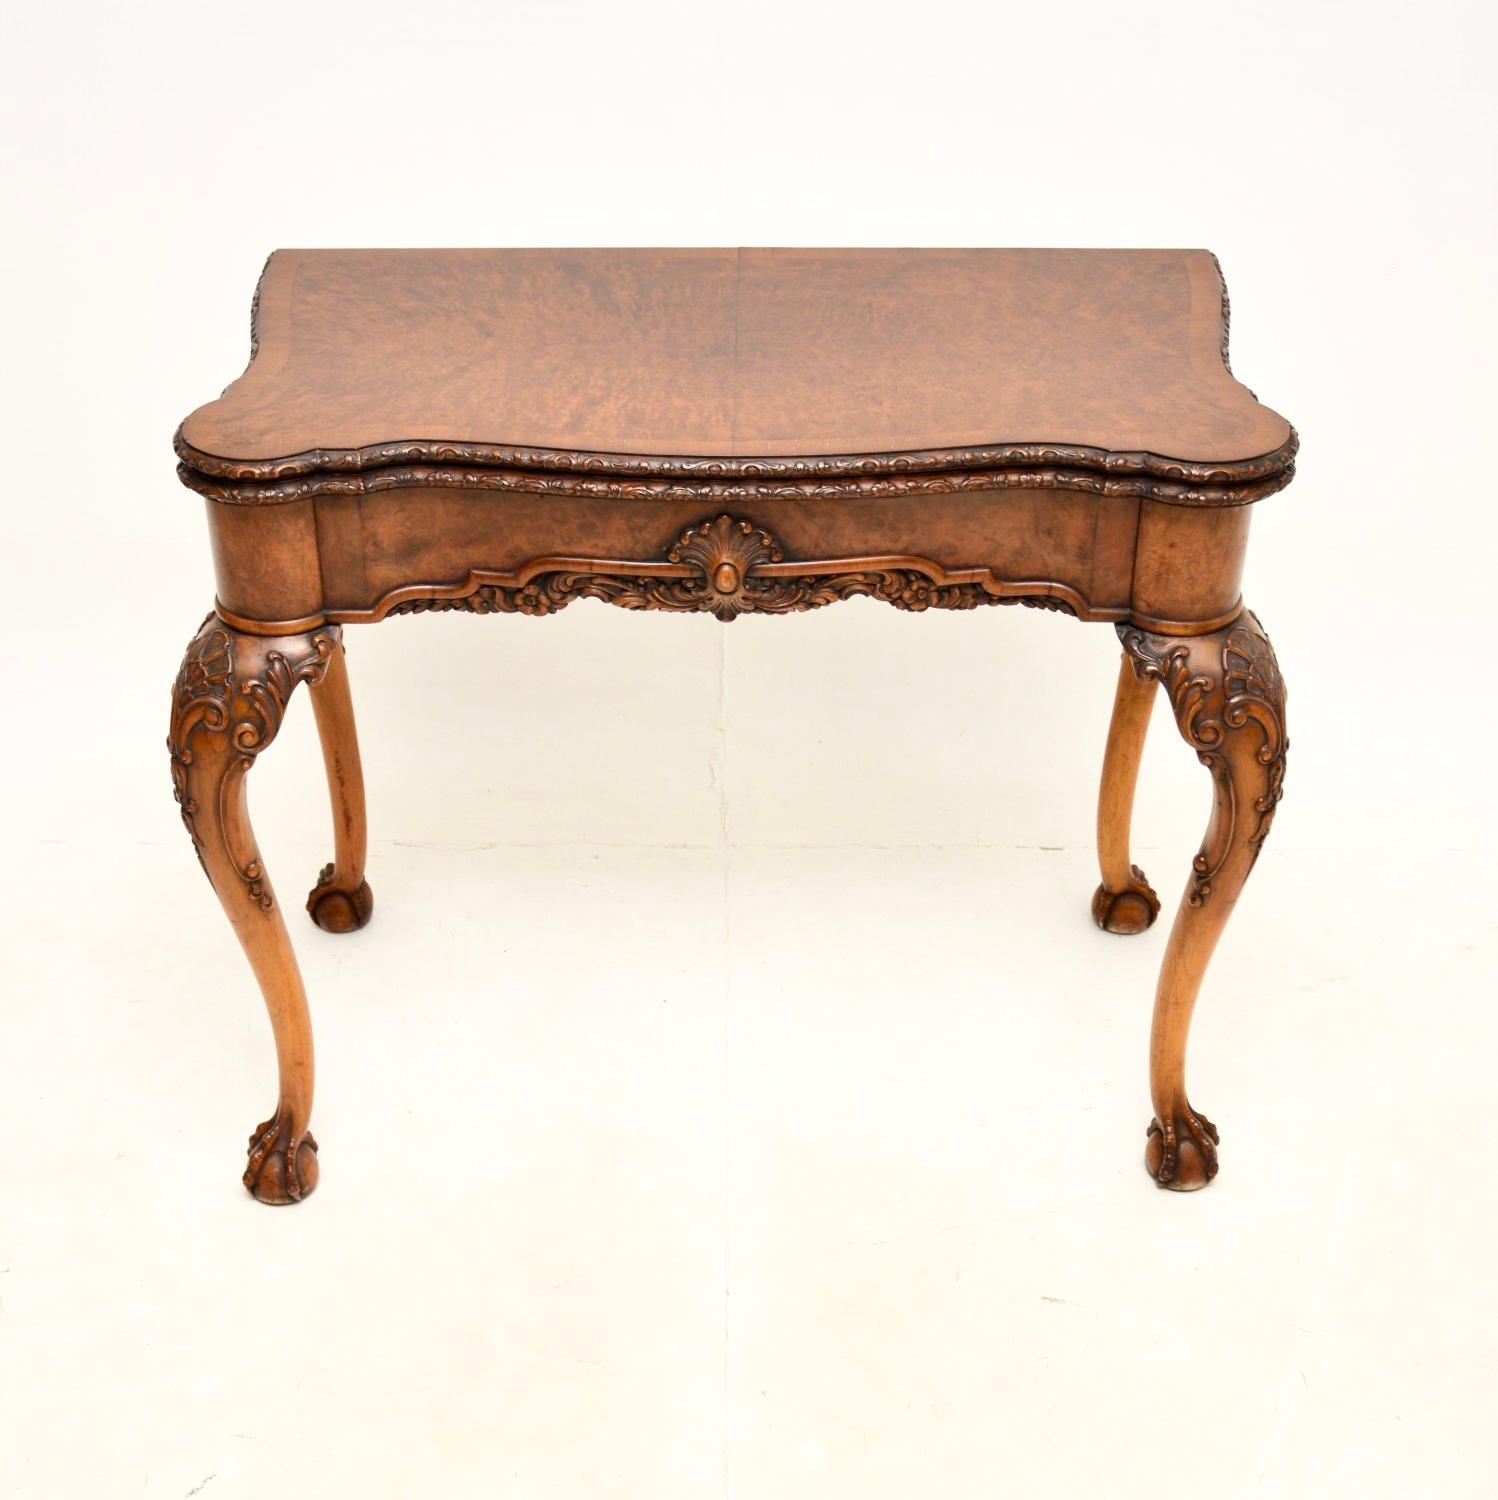 A fantastic antique burr walnut card table of the highest order. This was made in England, it dates from around the 1900-1920 period.

It is of outstanding quality, with fine and intricate carving throughout. The burr walnut grain patterns and